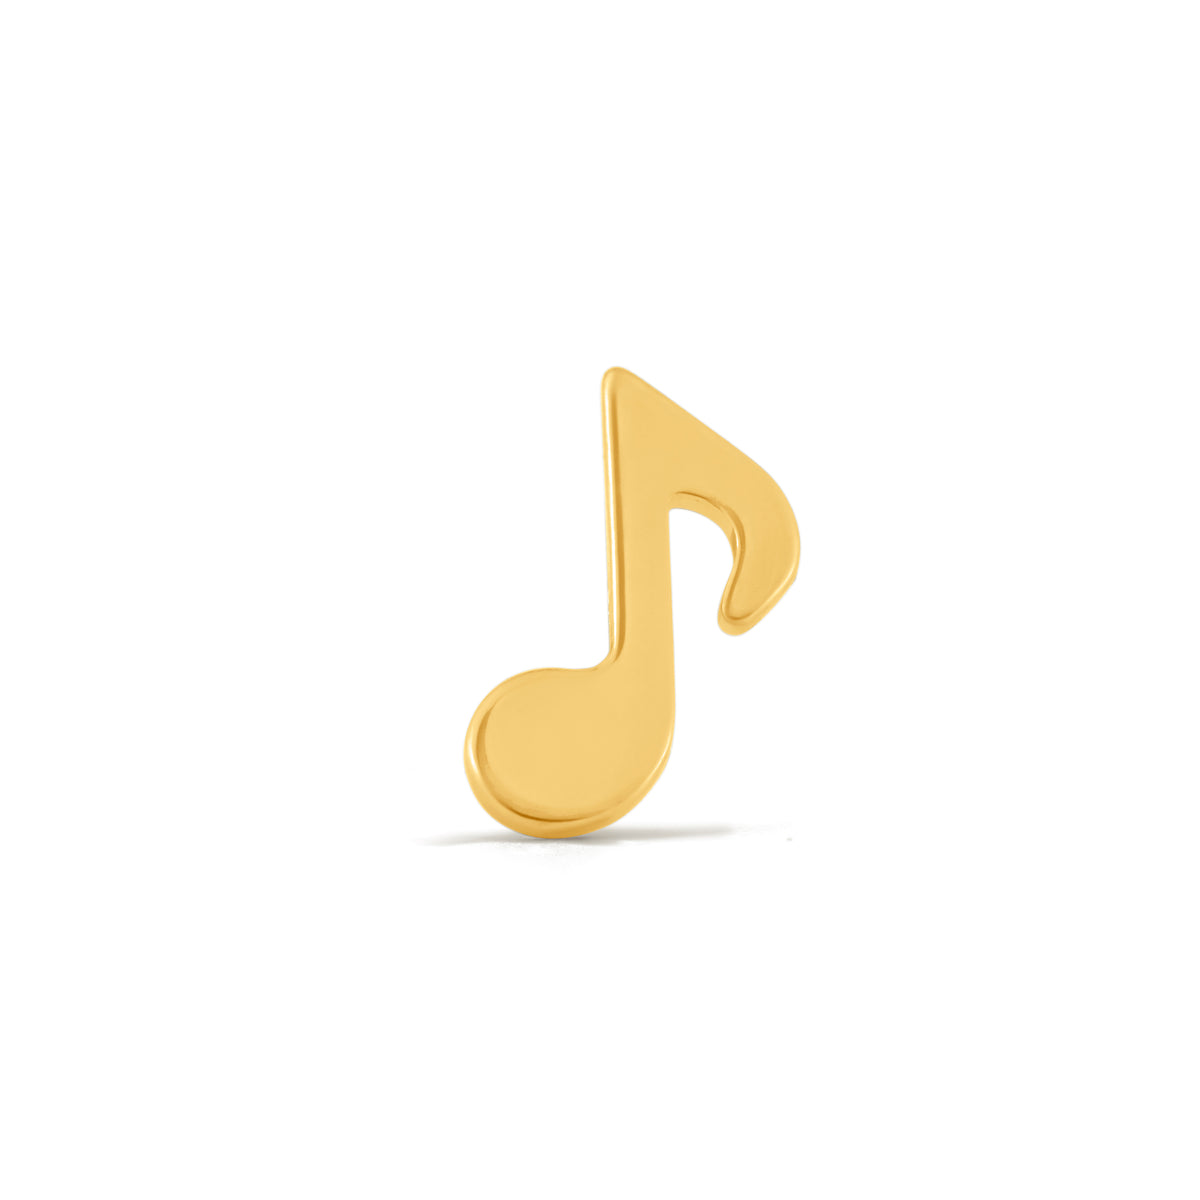 MUSIC NOTE IN GOLD